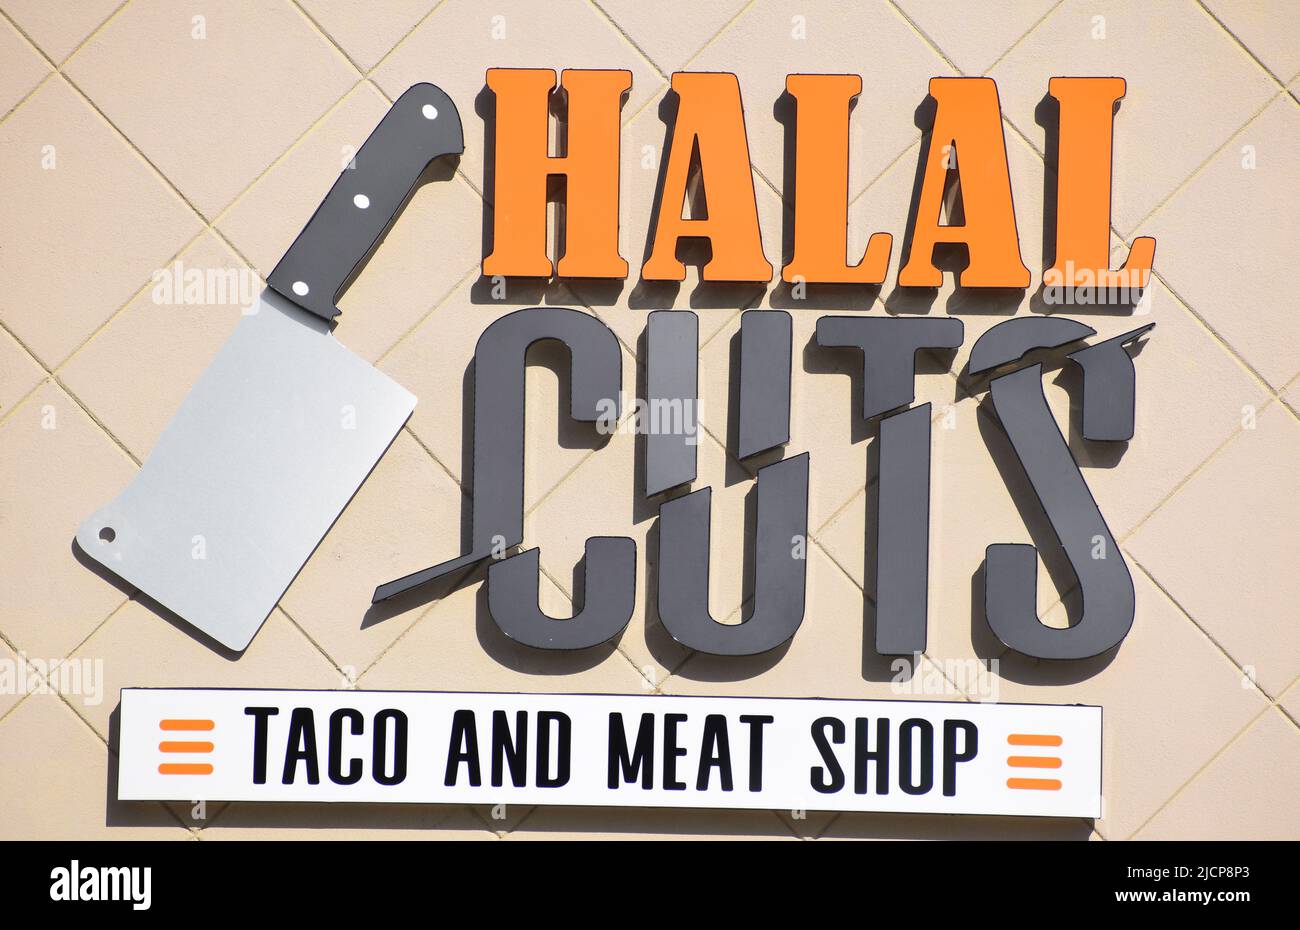 Close up of Halal Cuts Taco and Meat Shop sign Stock Photo